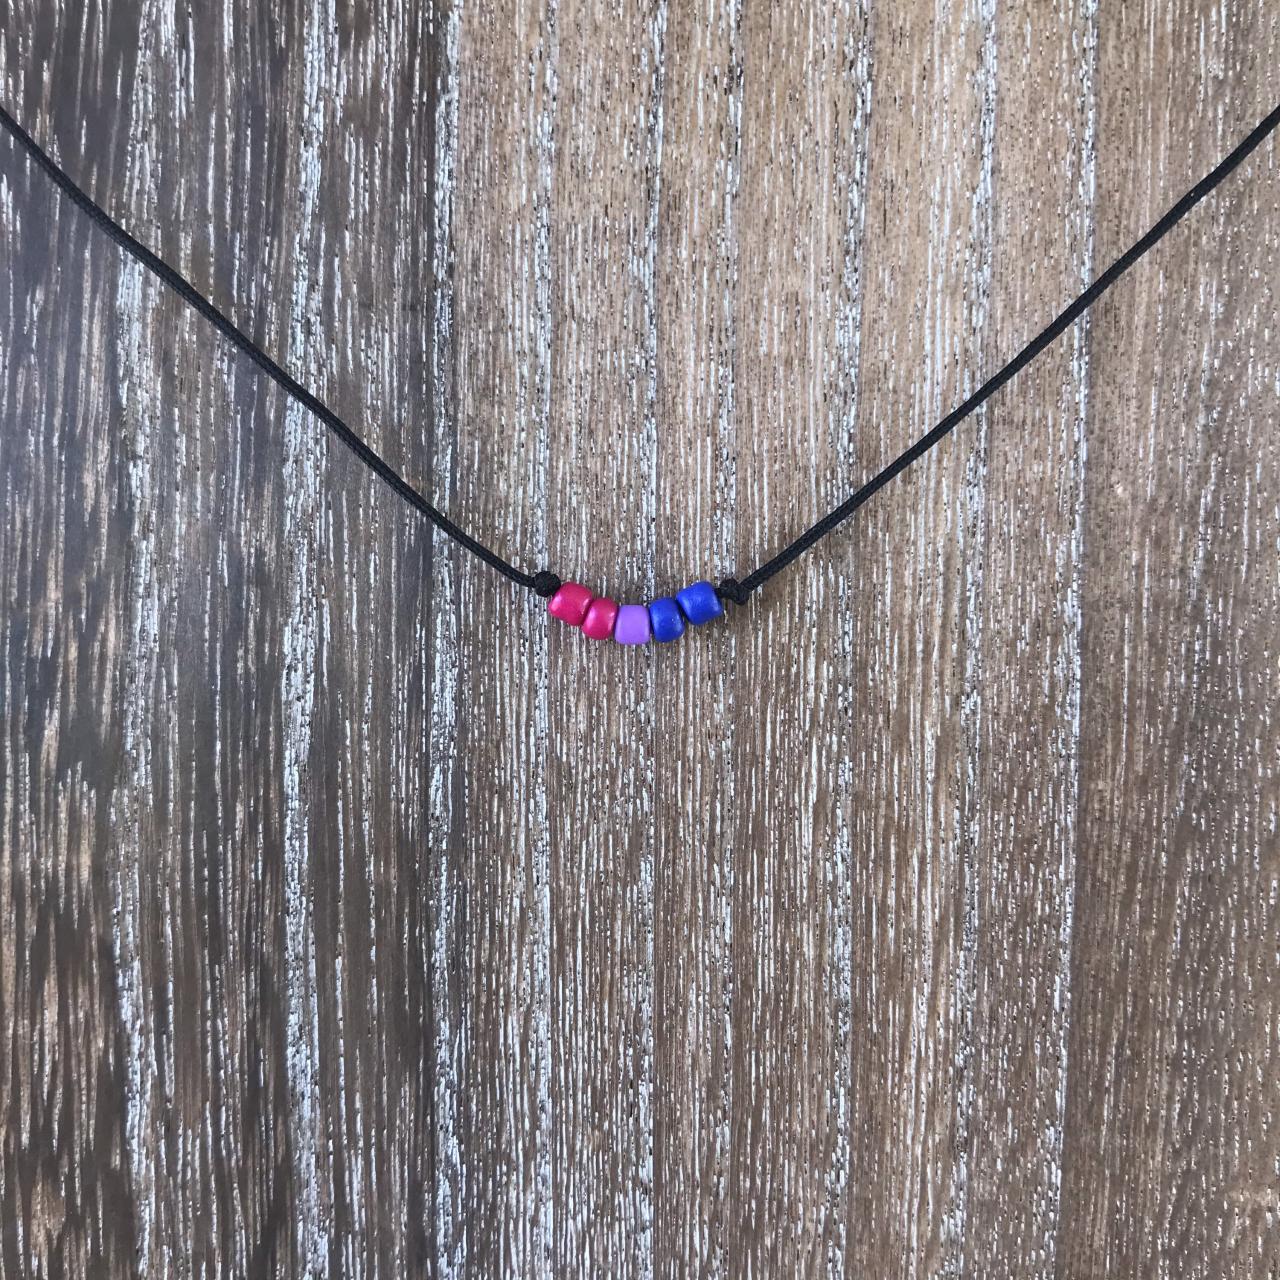 Pride Jewelry, Necklace Choker/necklace, Custom Pride Beaded Rainbow With Black Cord And Lobster Claw Clasp, Love Is Love